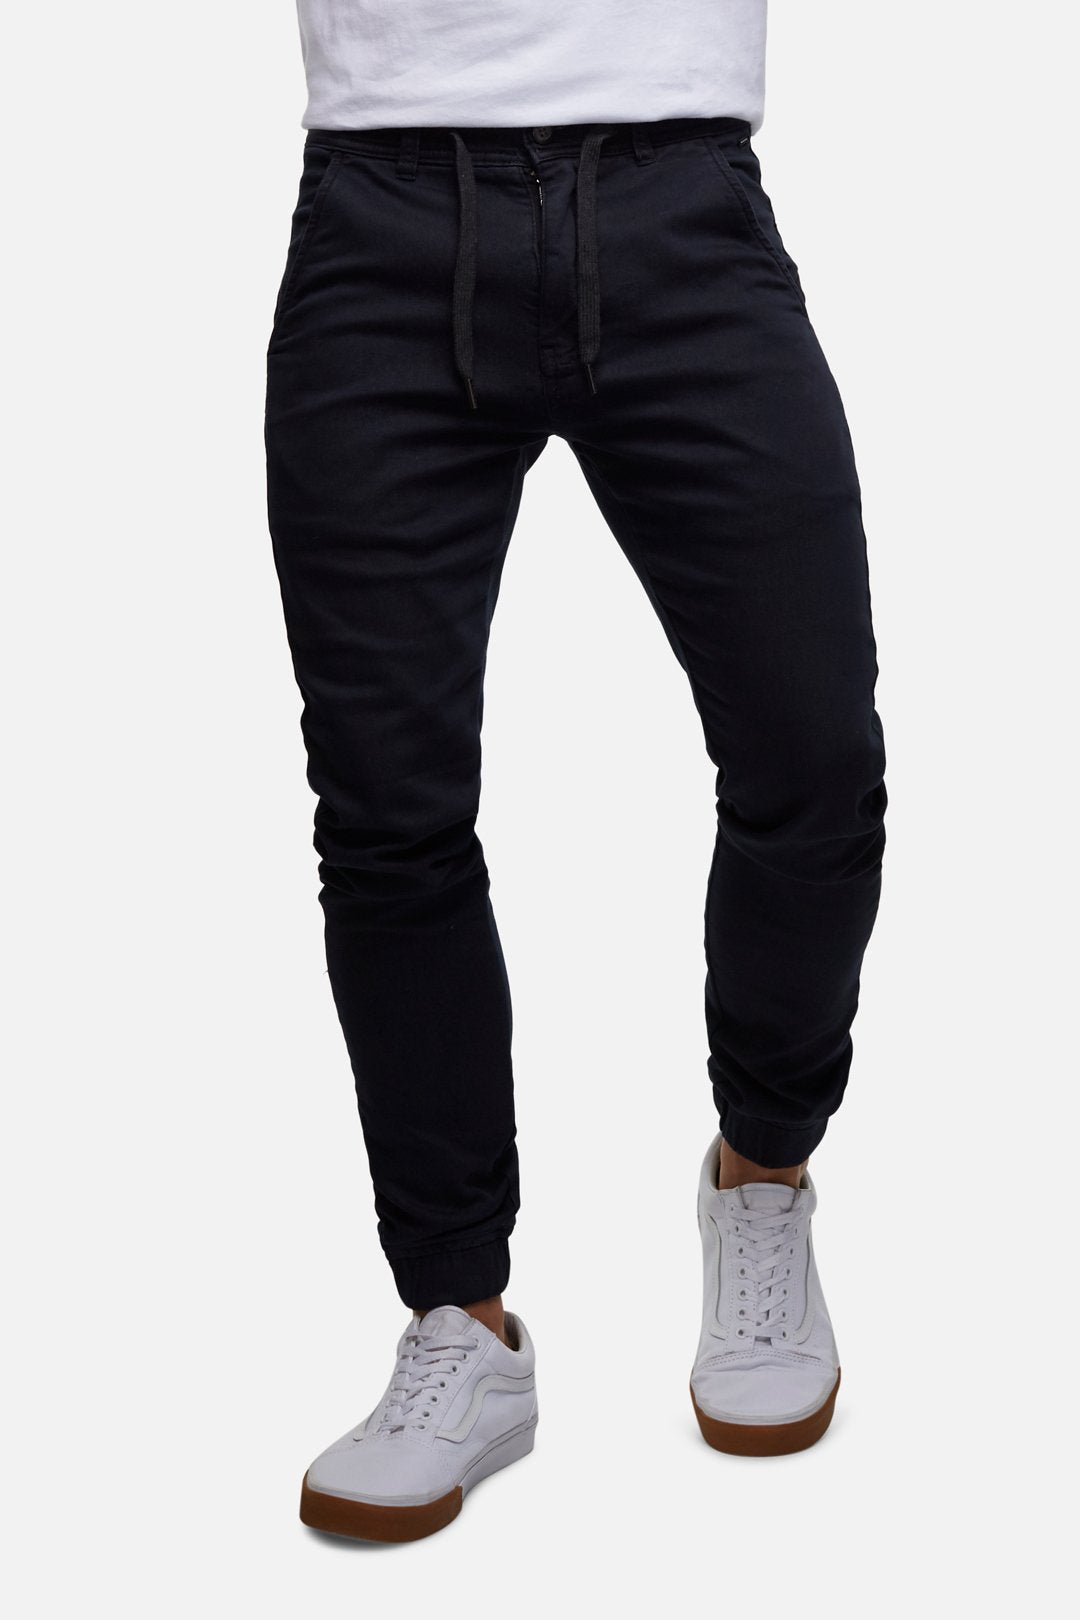 INDUSTRIE - The Drifter Chino Pant - RAW